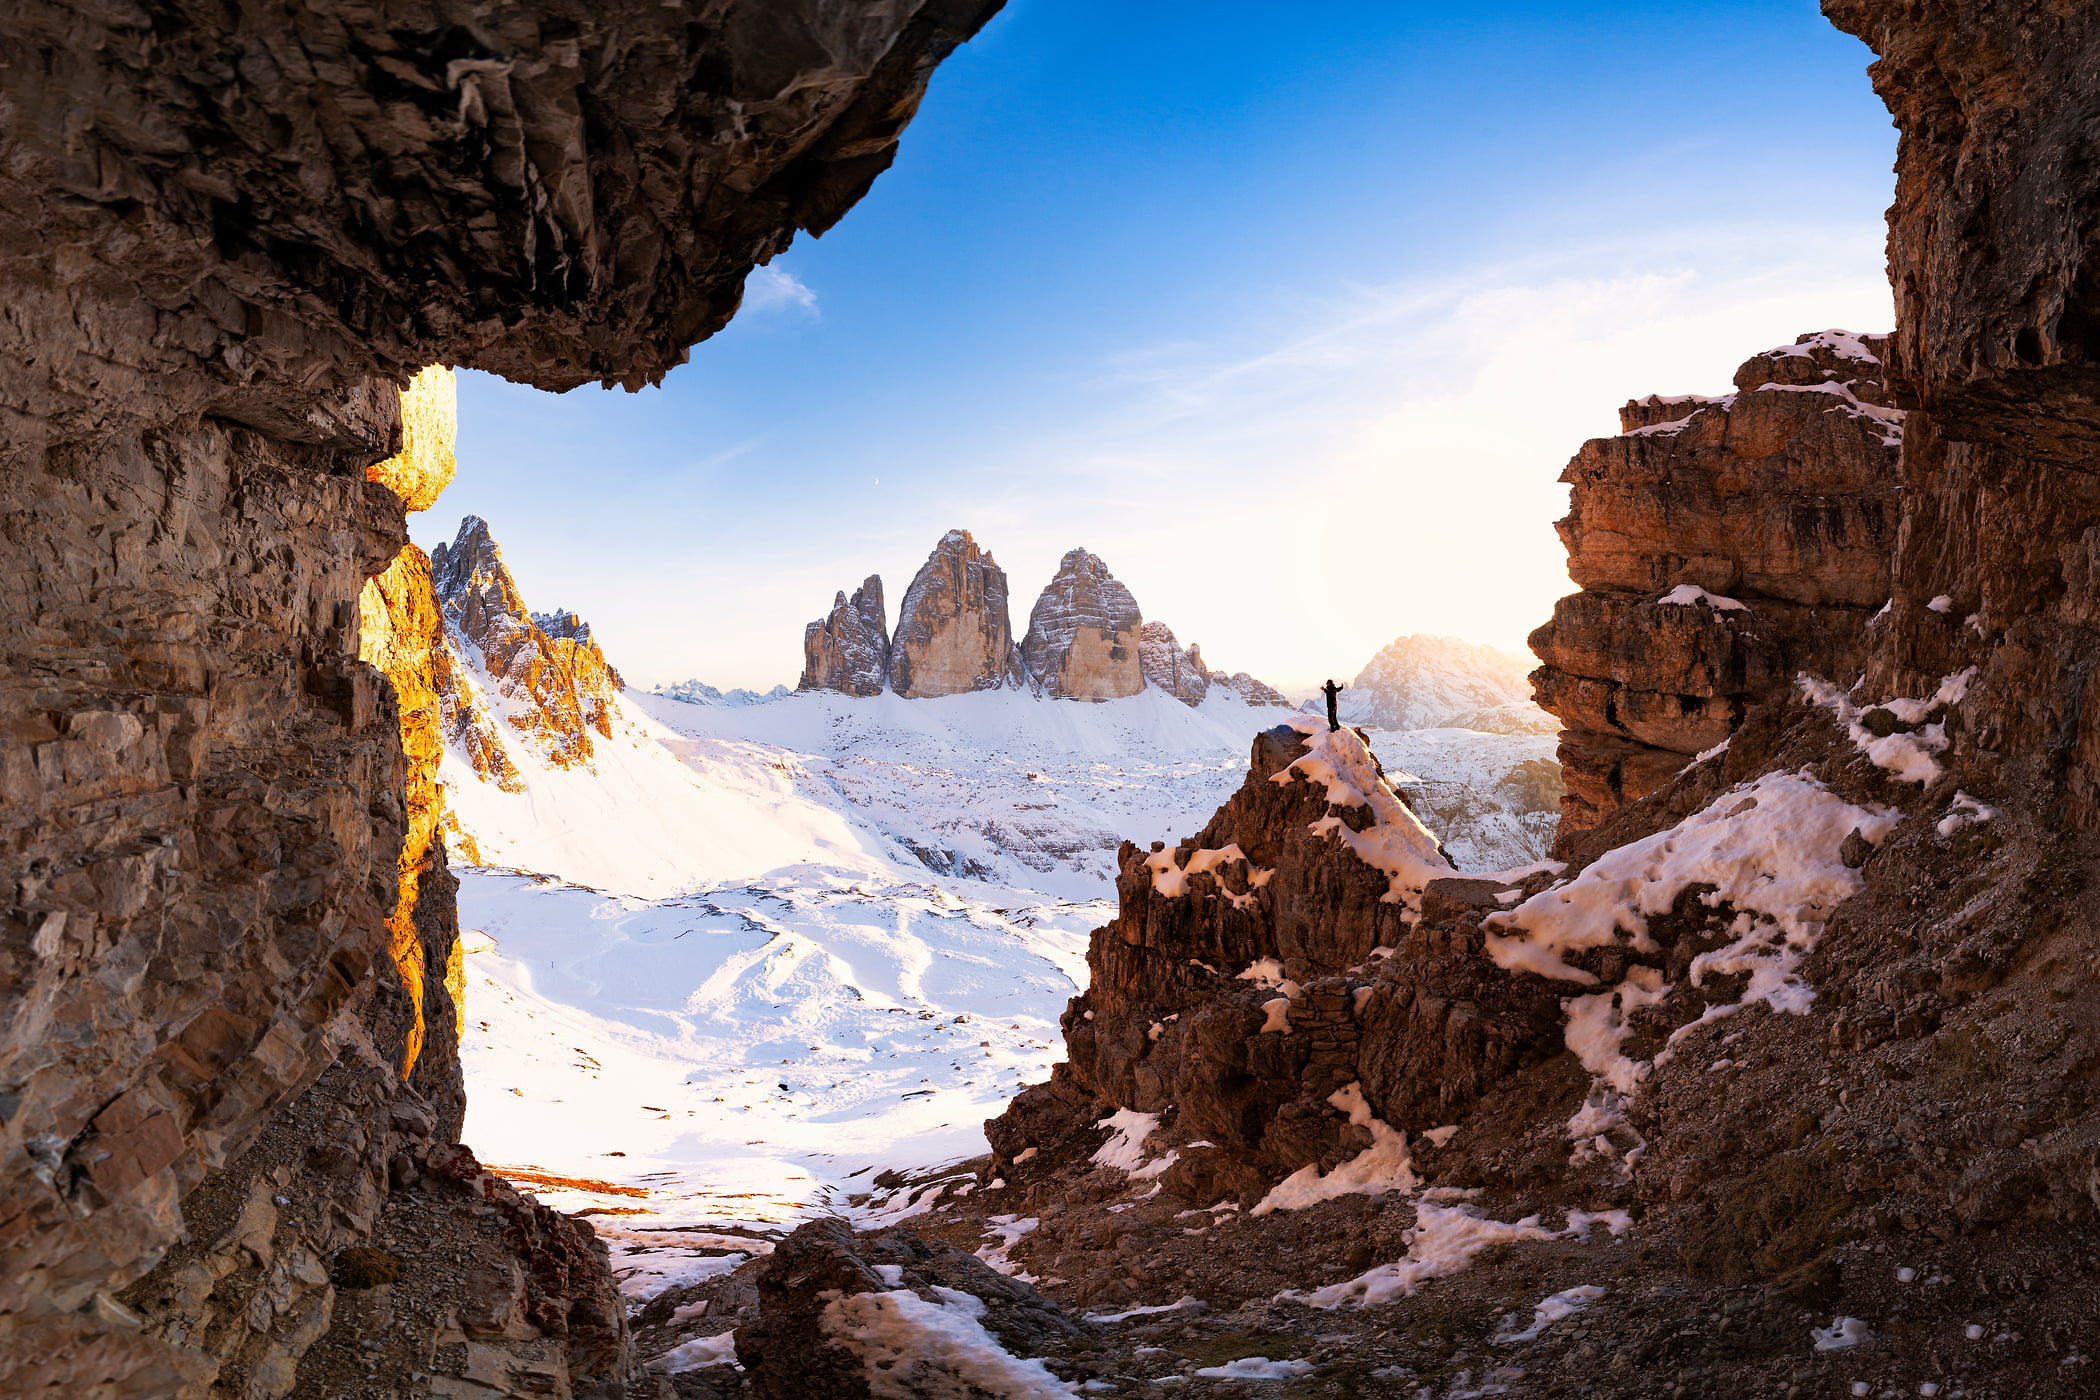 104 megapixels! A very high resolution, large-format VAST photo print of Drei Zinnen, The Dolomites, Italy; landscape photograph created by Roberto Moiola in The Dolomites, Cortina d'Ampezzo, Italy.